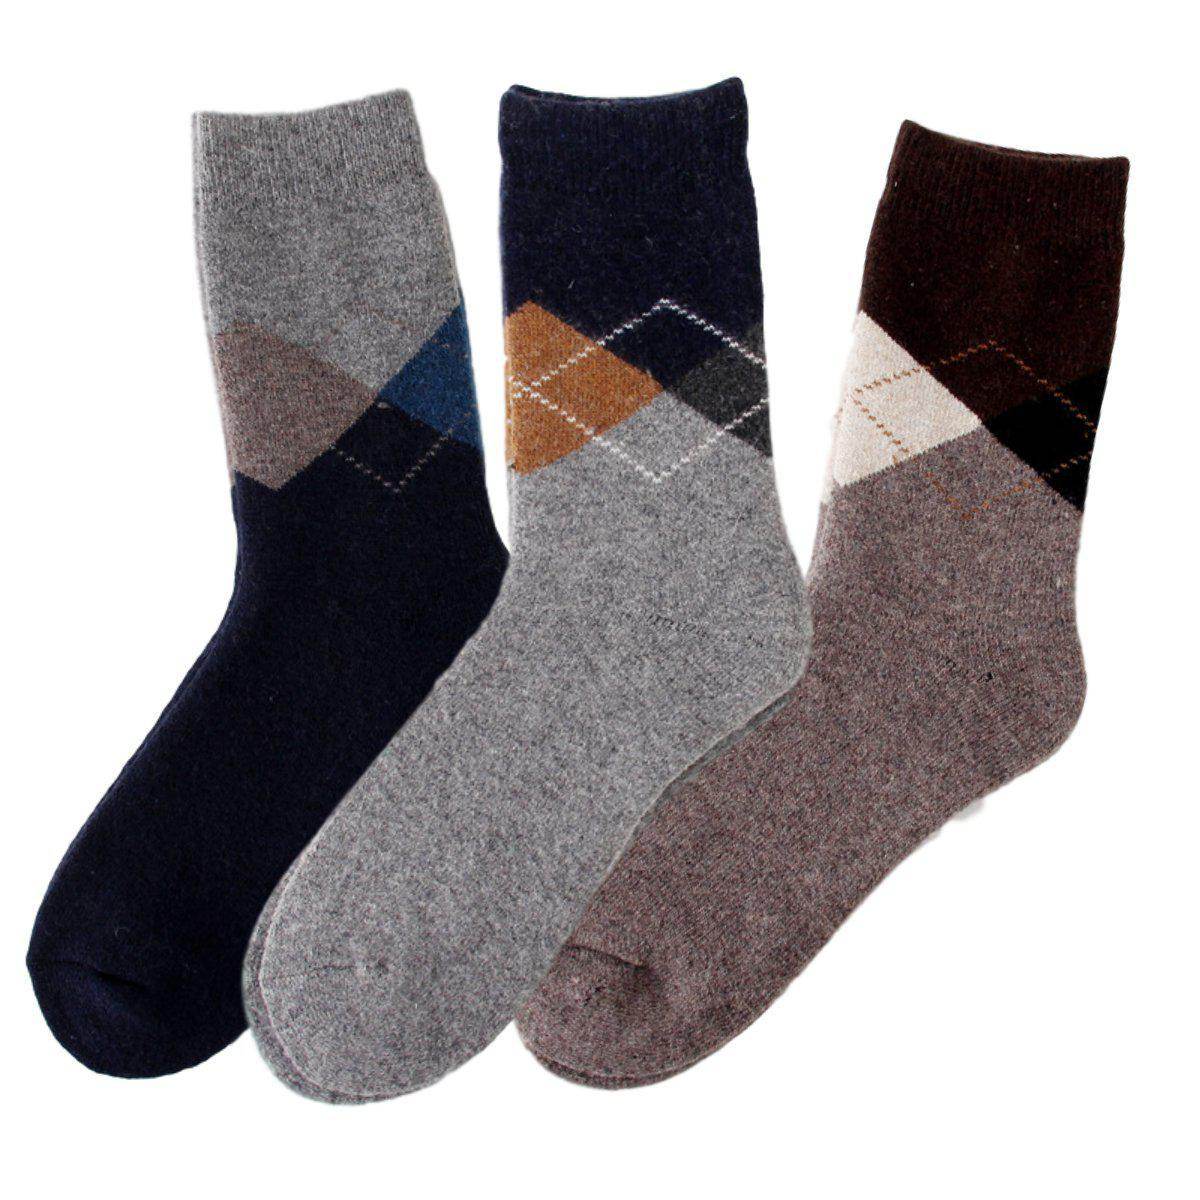 ARGYLE EXTRA THICK AND WARM MEN'S WOOL SOCKS - Best Compression Socks Sale